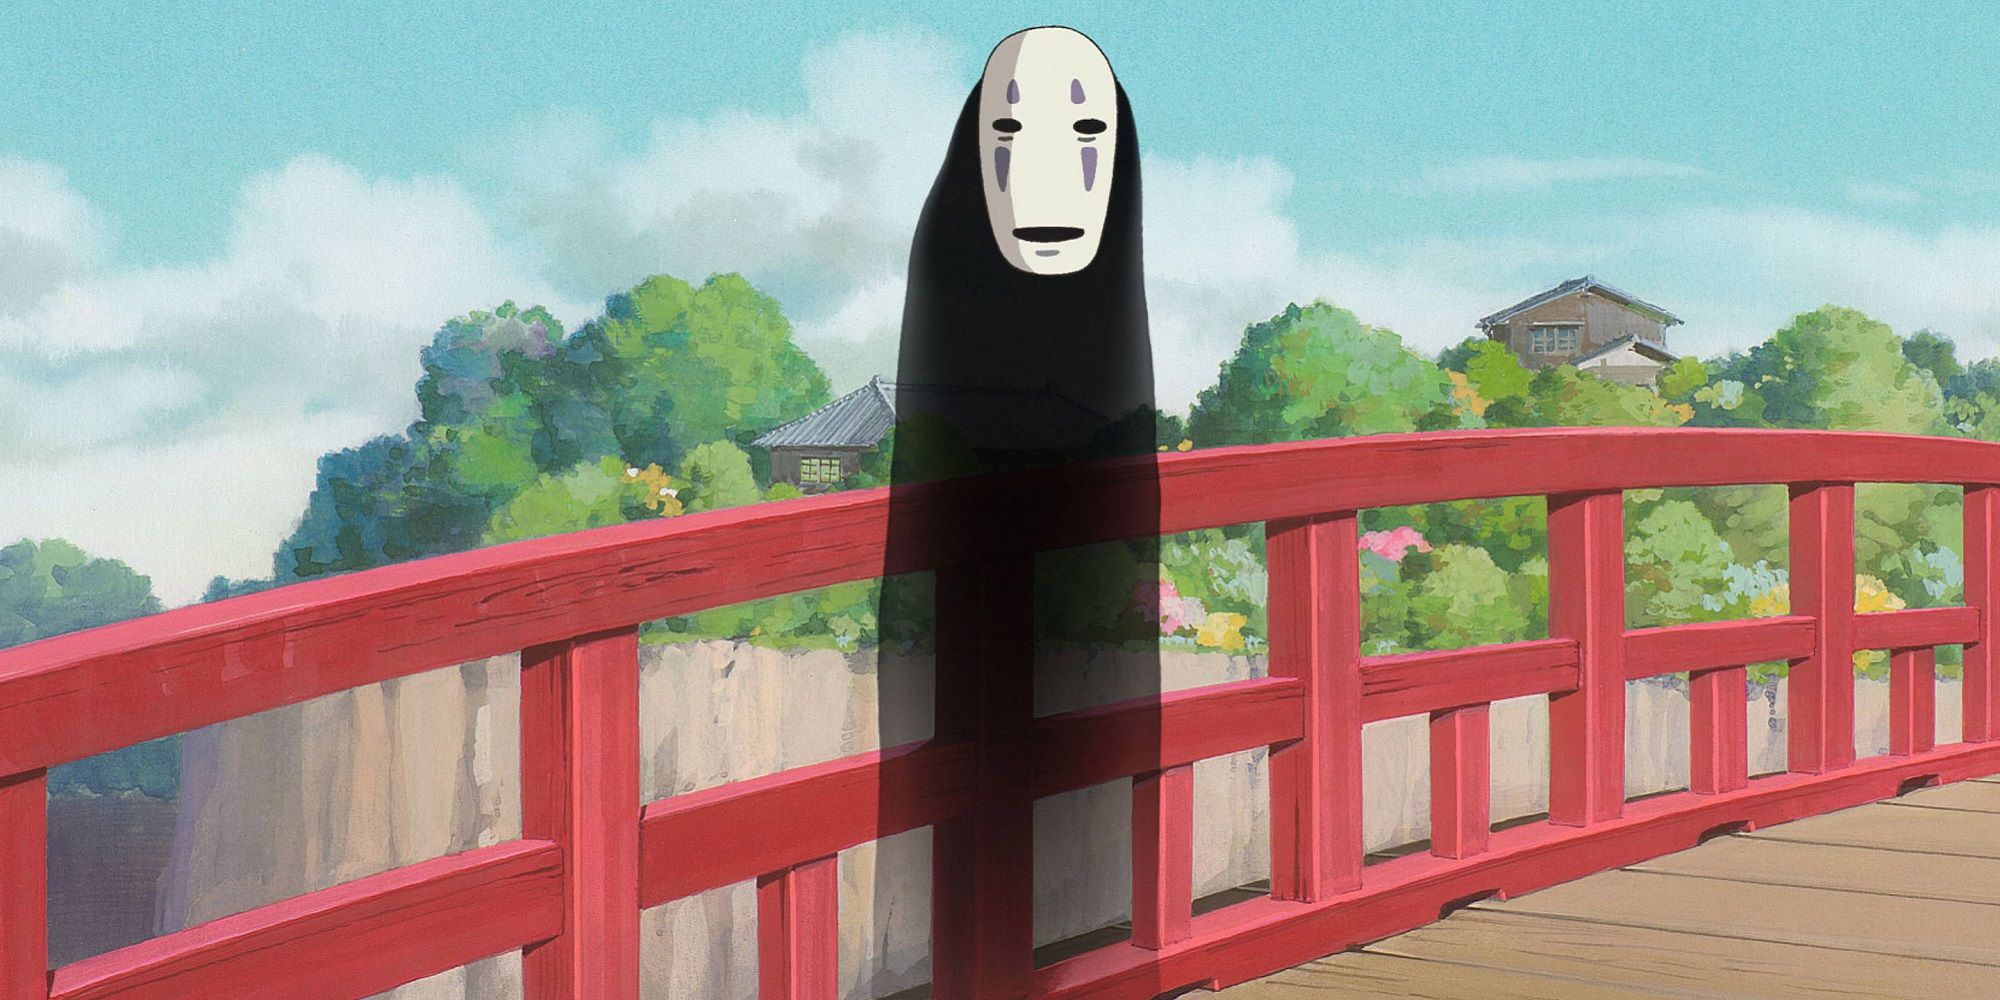 No-Face on a bridge in 'Spirited Away'